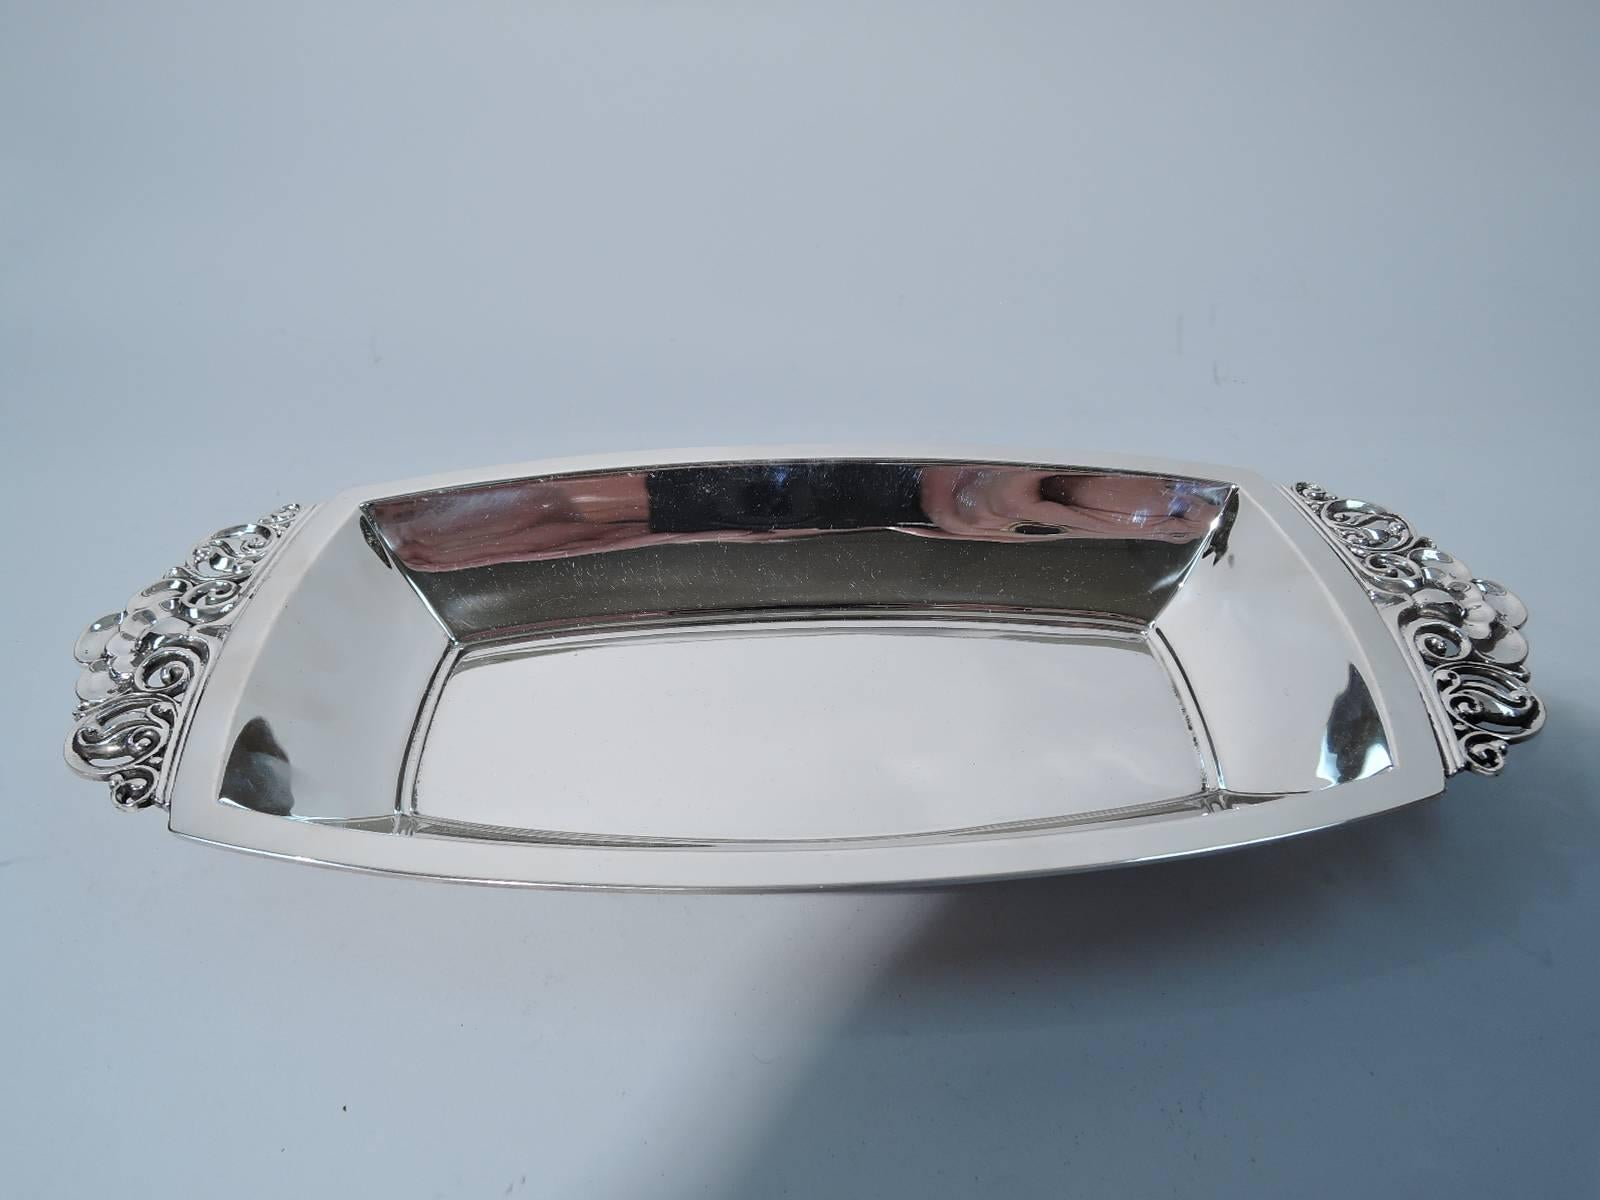 Sterling silver bread tray. Made by Tiffany & Co. in New York, circa 1950. Rectangular with curved sides and flat rim. Mounted to ends are handles with pierced stylized flowers and scrolls. Stark functionalism with the daring addition of ornament.